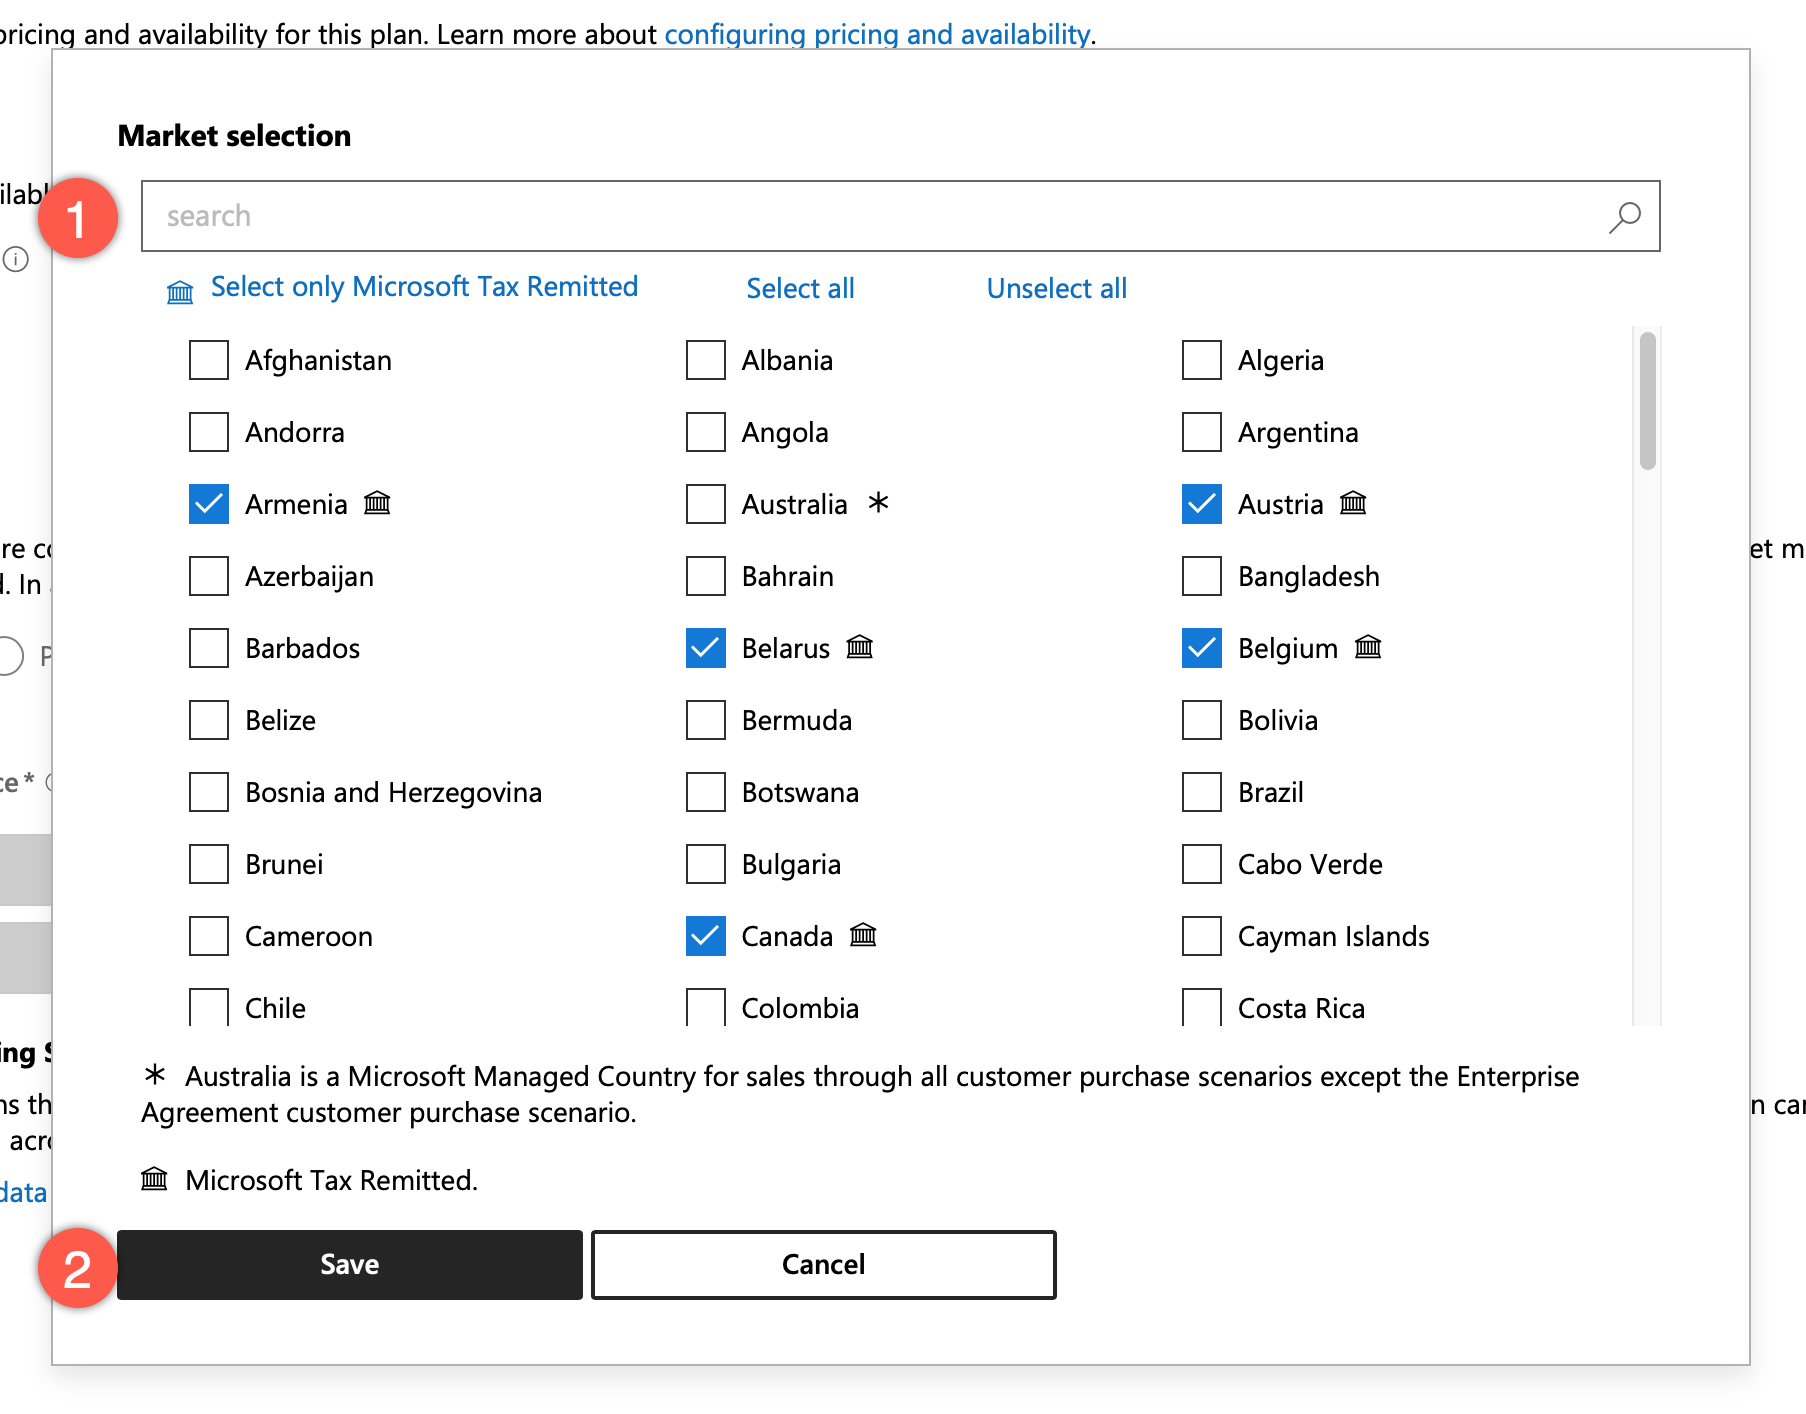 Microsoft Partner Center - Plan Overview - Pricing and Availability - Markets